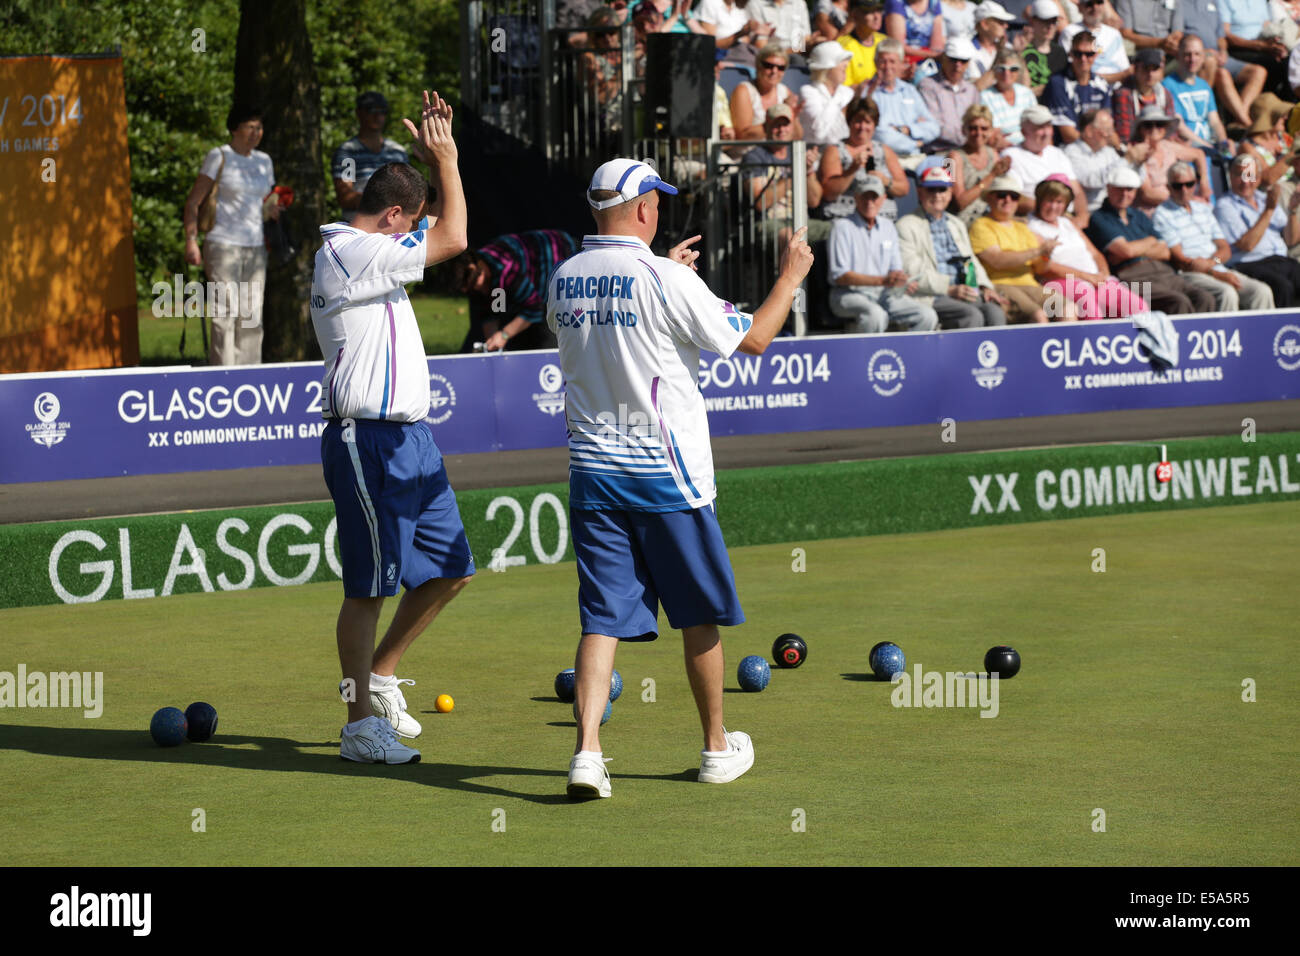 Kelvingrove Lawn Bowls Centre, Glasgow, Scotland, UK, Friday, 25th  July, 2014. Neil Speirs left and David Peacock right of Scotland playing in a Men's Triples Lawn Bowls Preliminary Match at the Glasgow 2014 Commonwealth Games Stock Photo